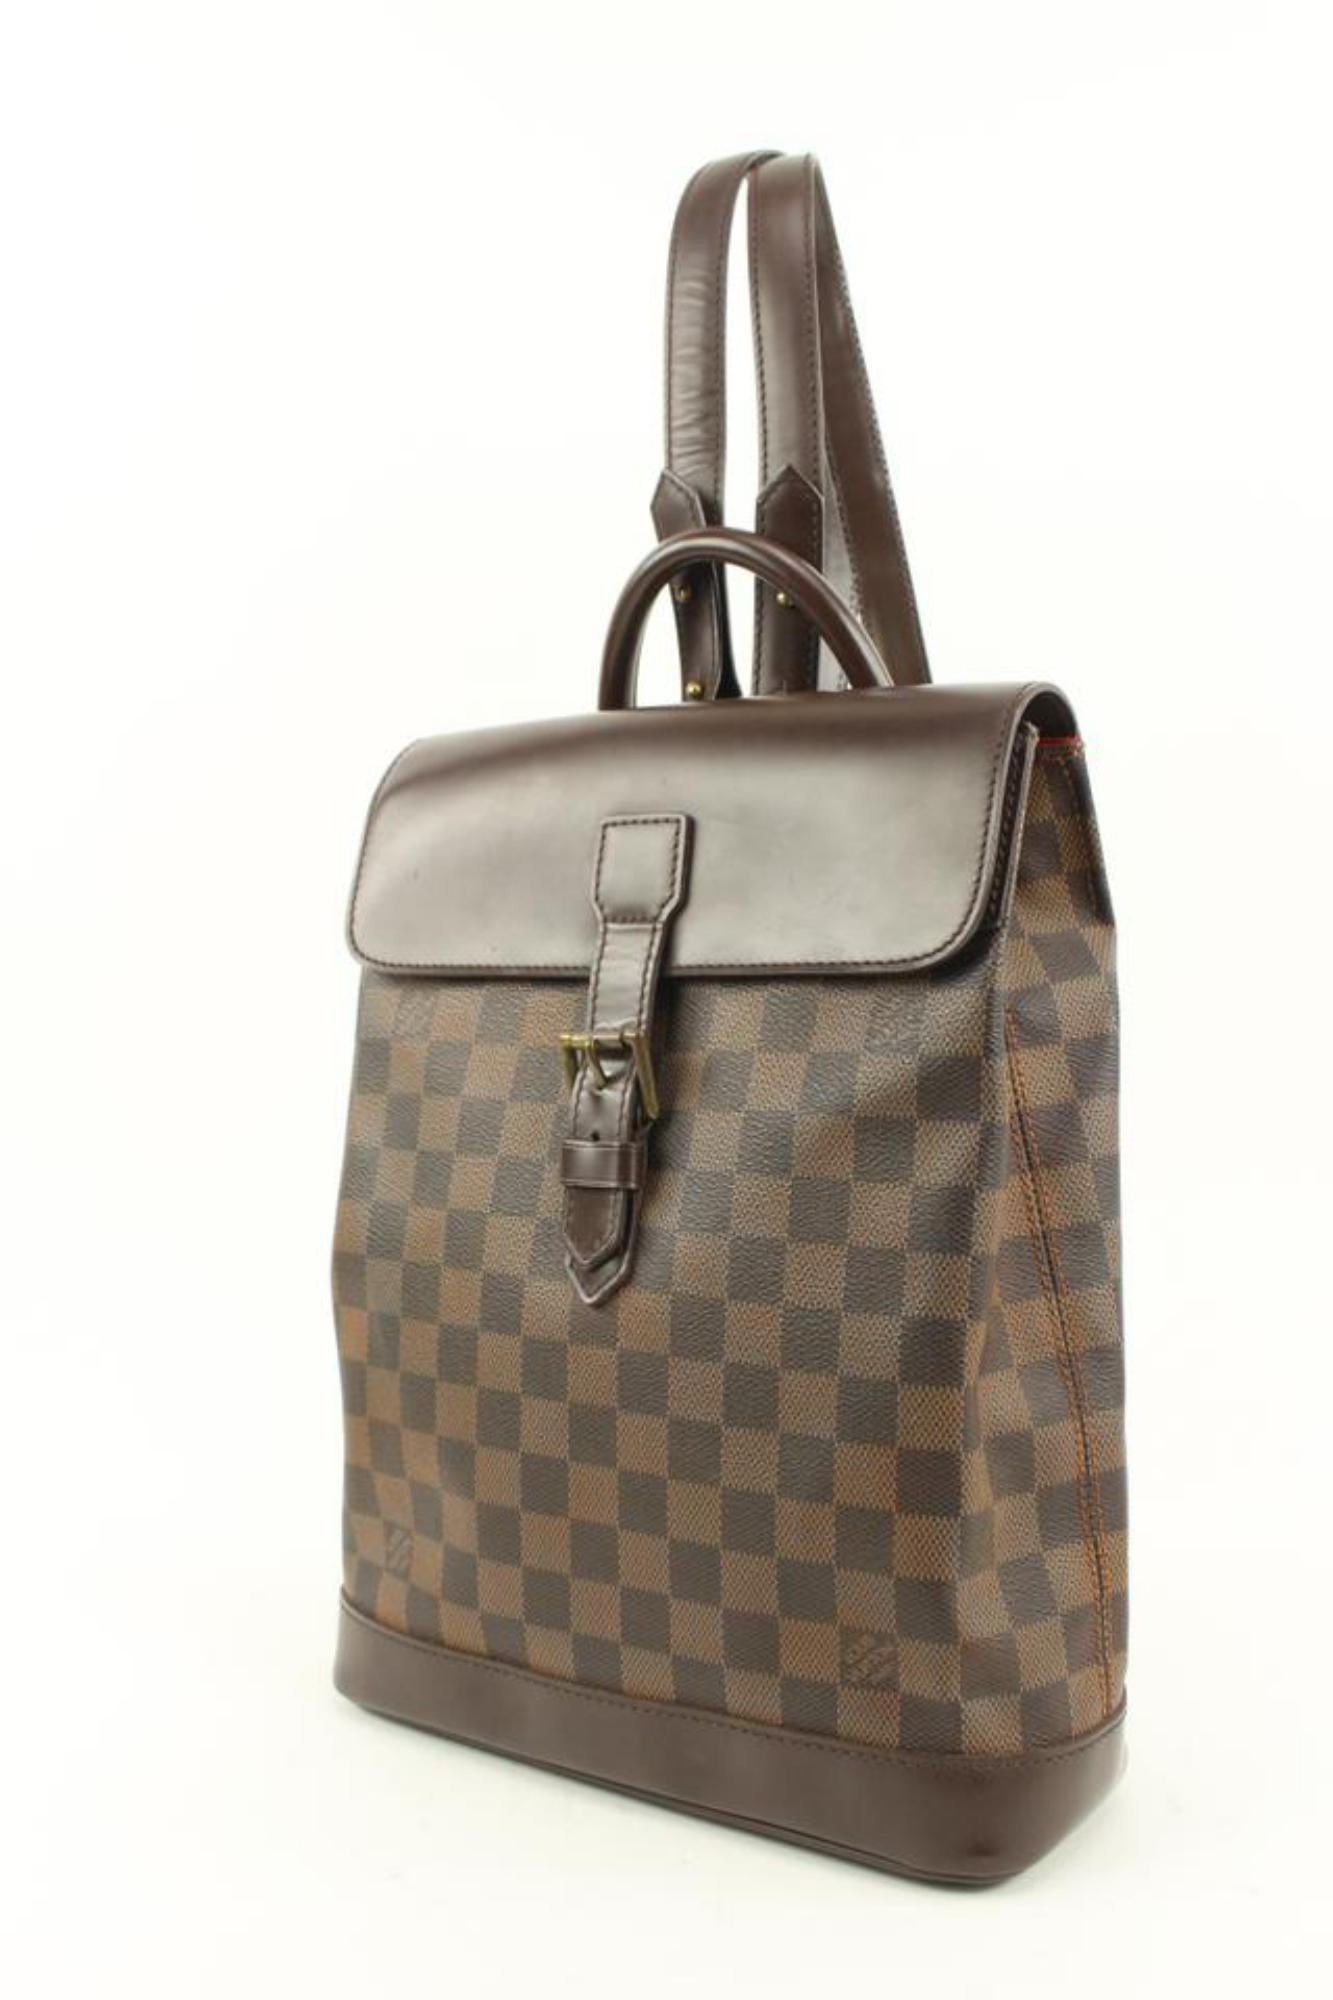 Louis Vuitton Damier Ebene Soho Backpack S29lv33
Date Code/Serial Number: TH2007
Made In: France
Measurements: Length:  11